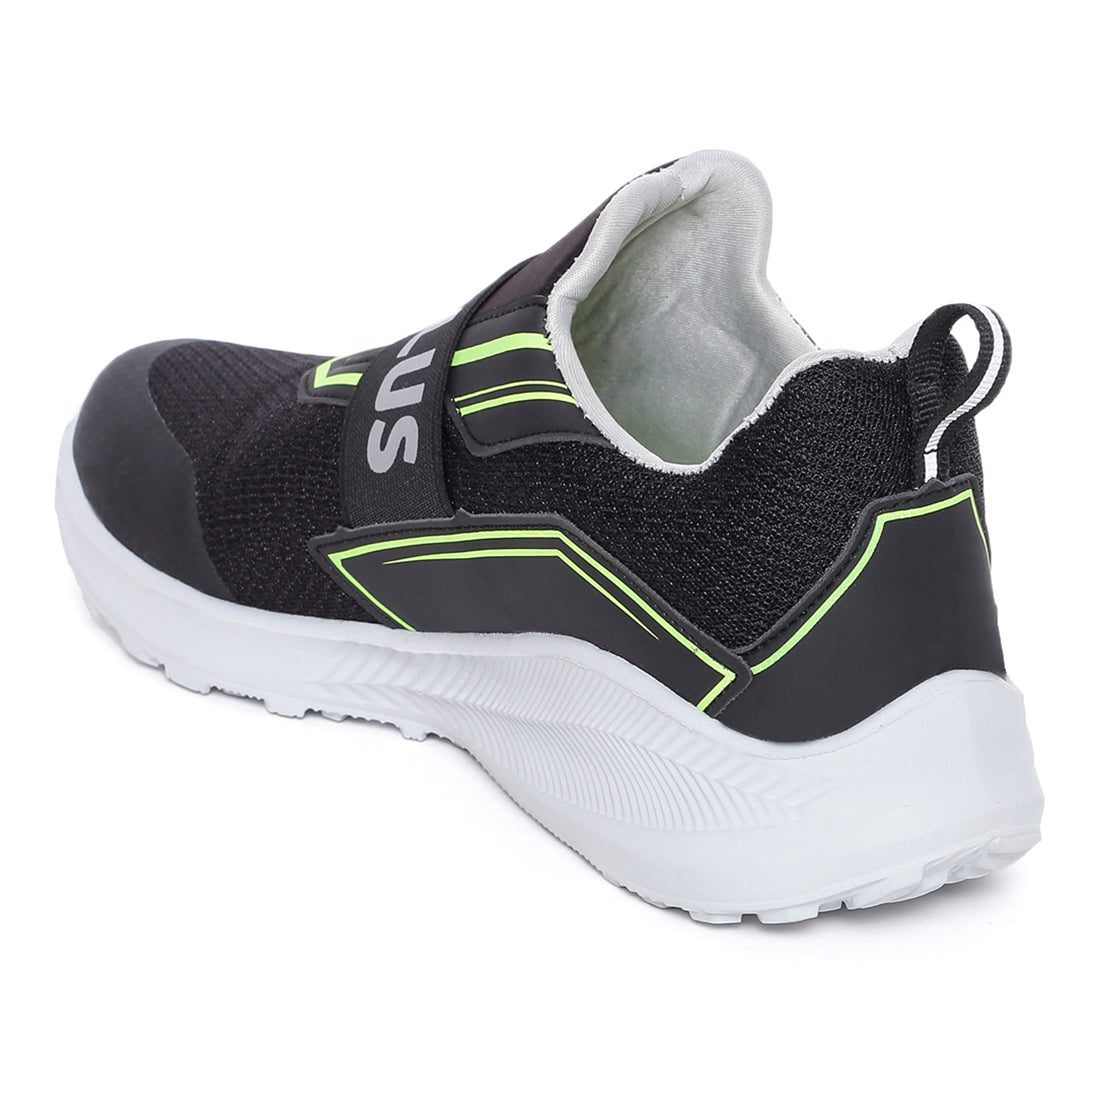 Stimulus FBSTG6012AS Black Comfortable Daily Outdoor Sports Shoes For Men